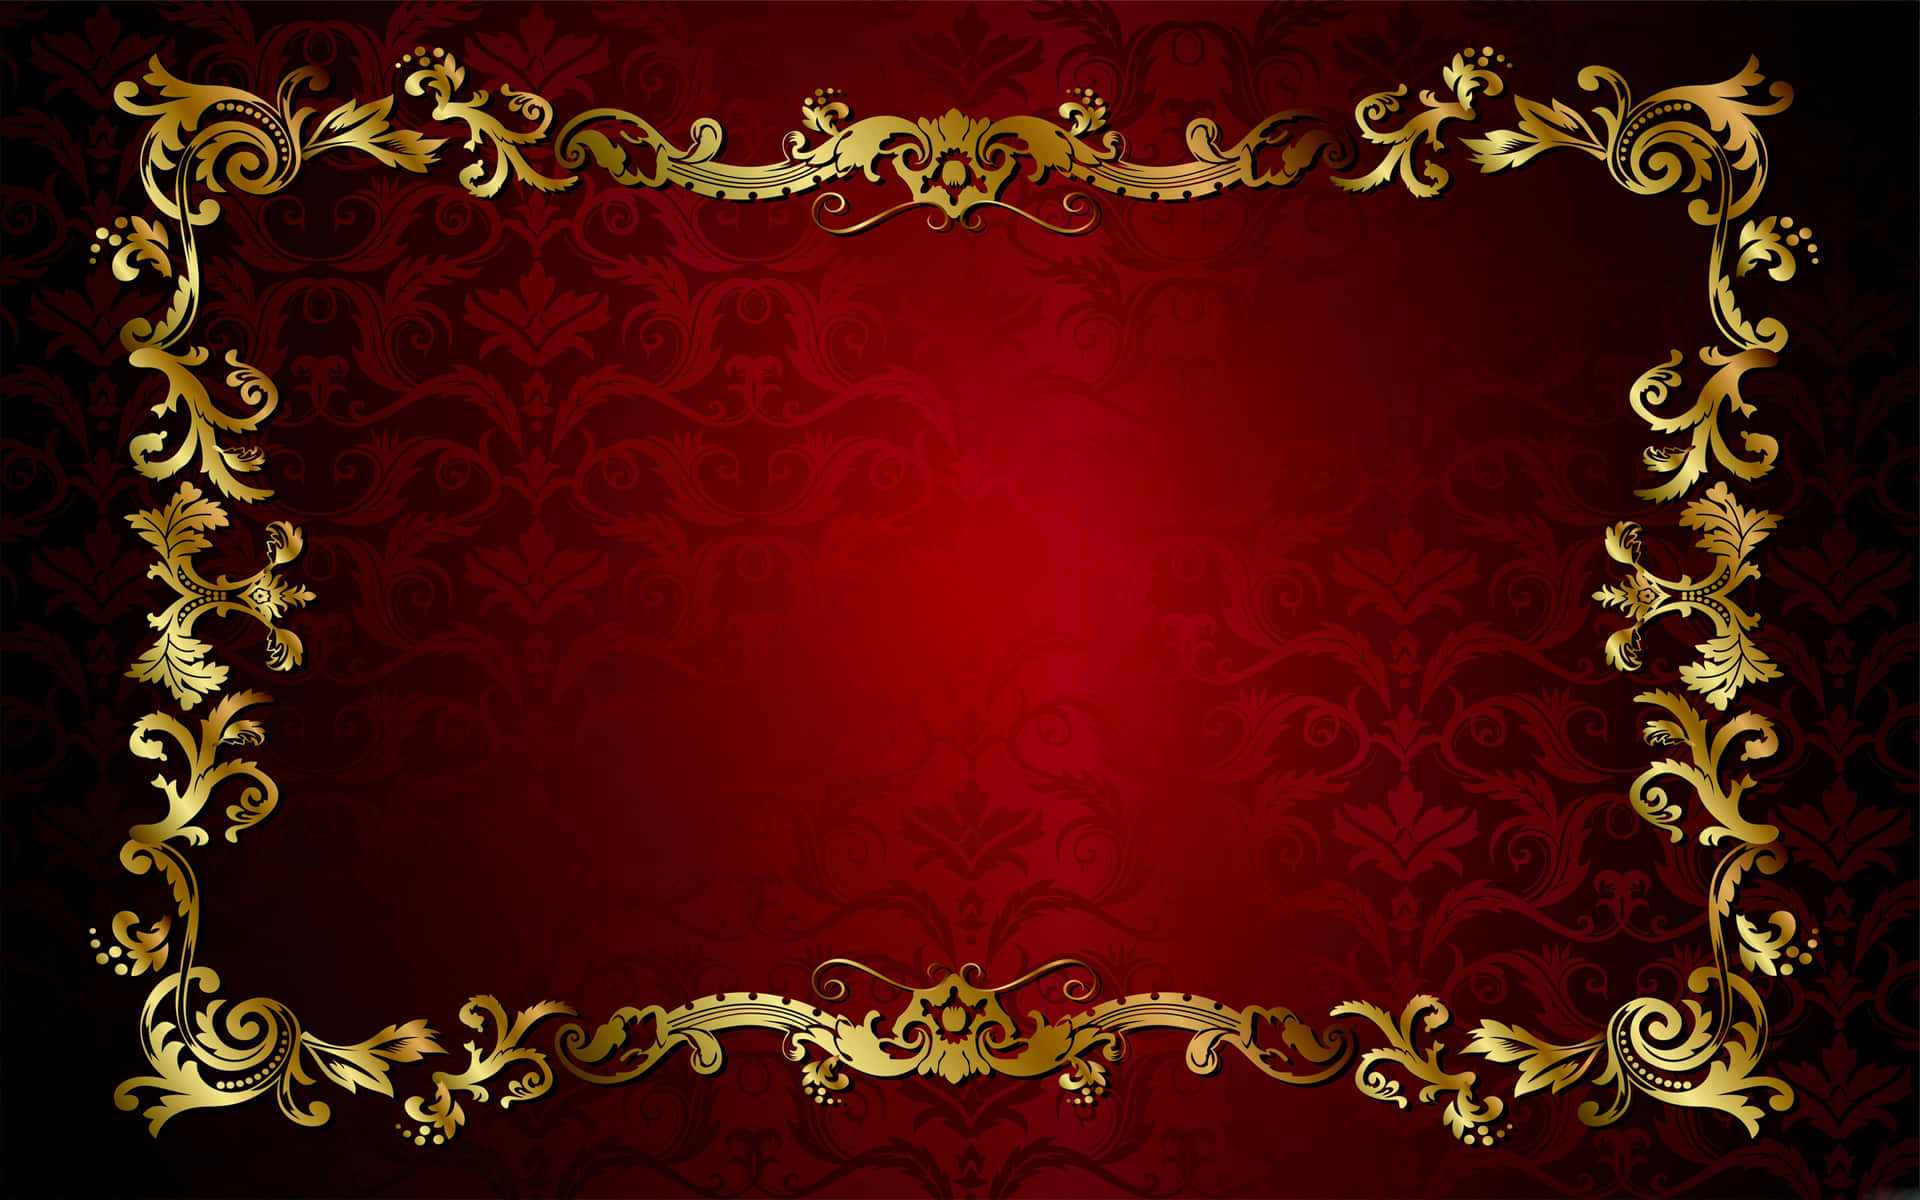 A vibrant red and gold picture of intricate patterns. Wallpaper